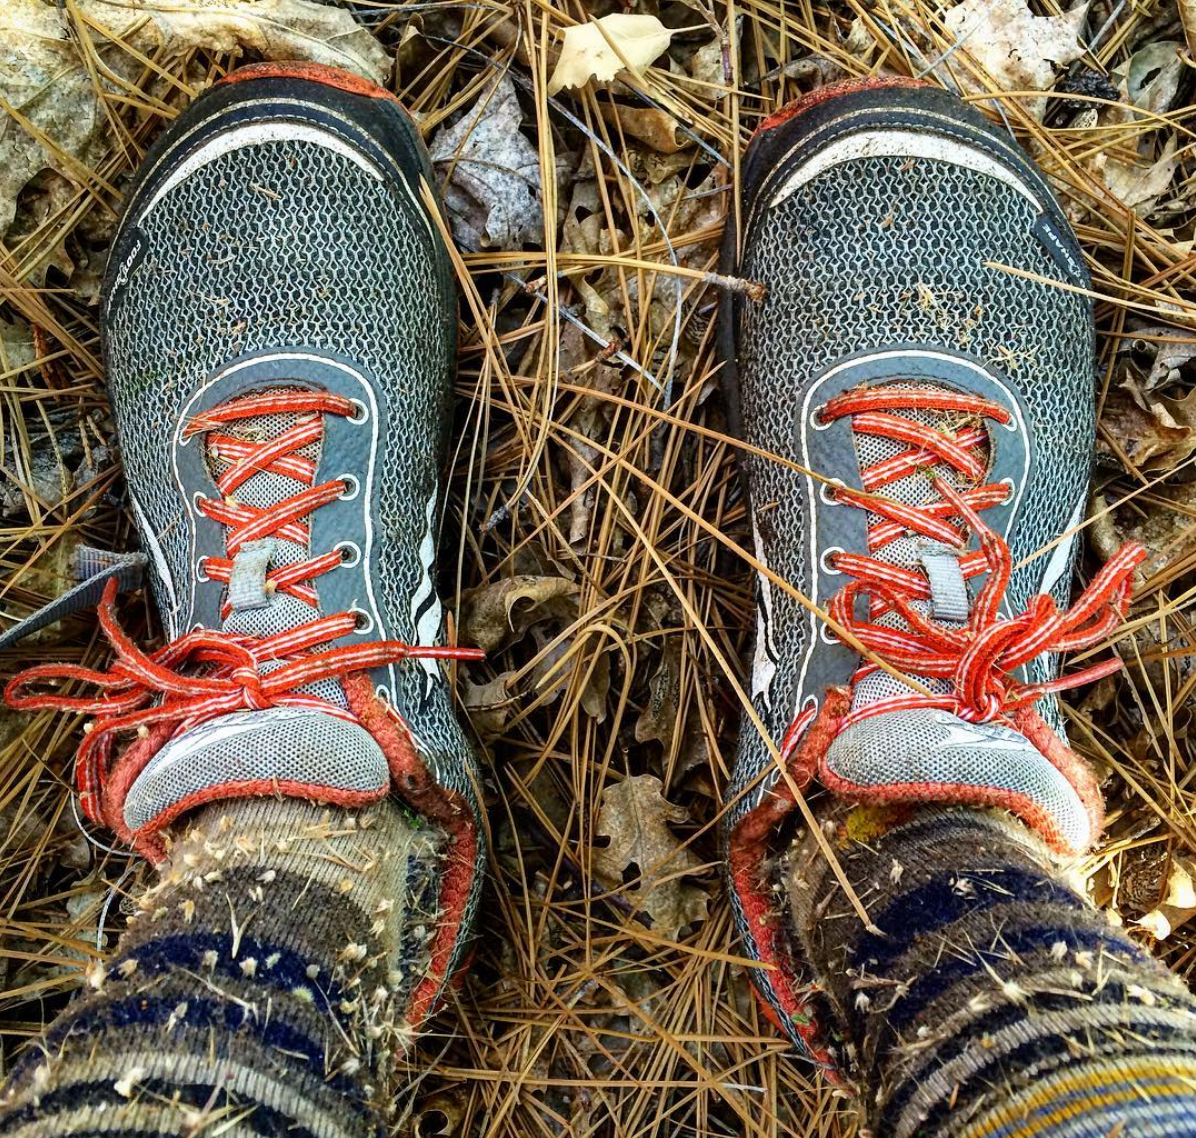 Alli's shoes and socks covered in burrs.